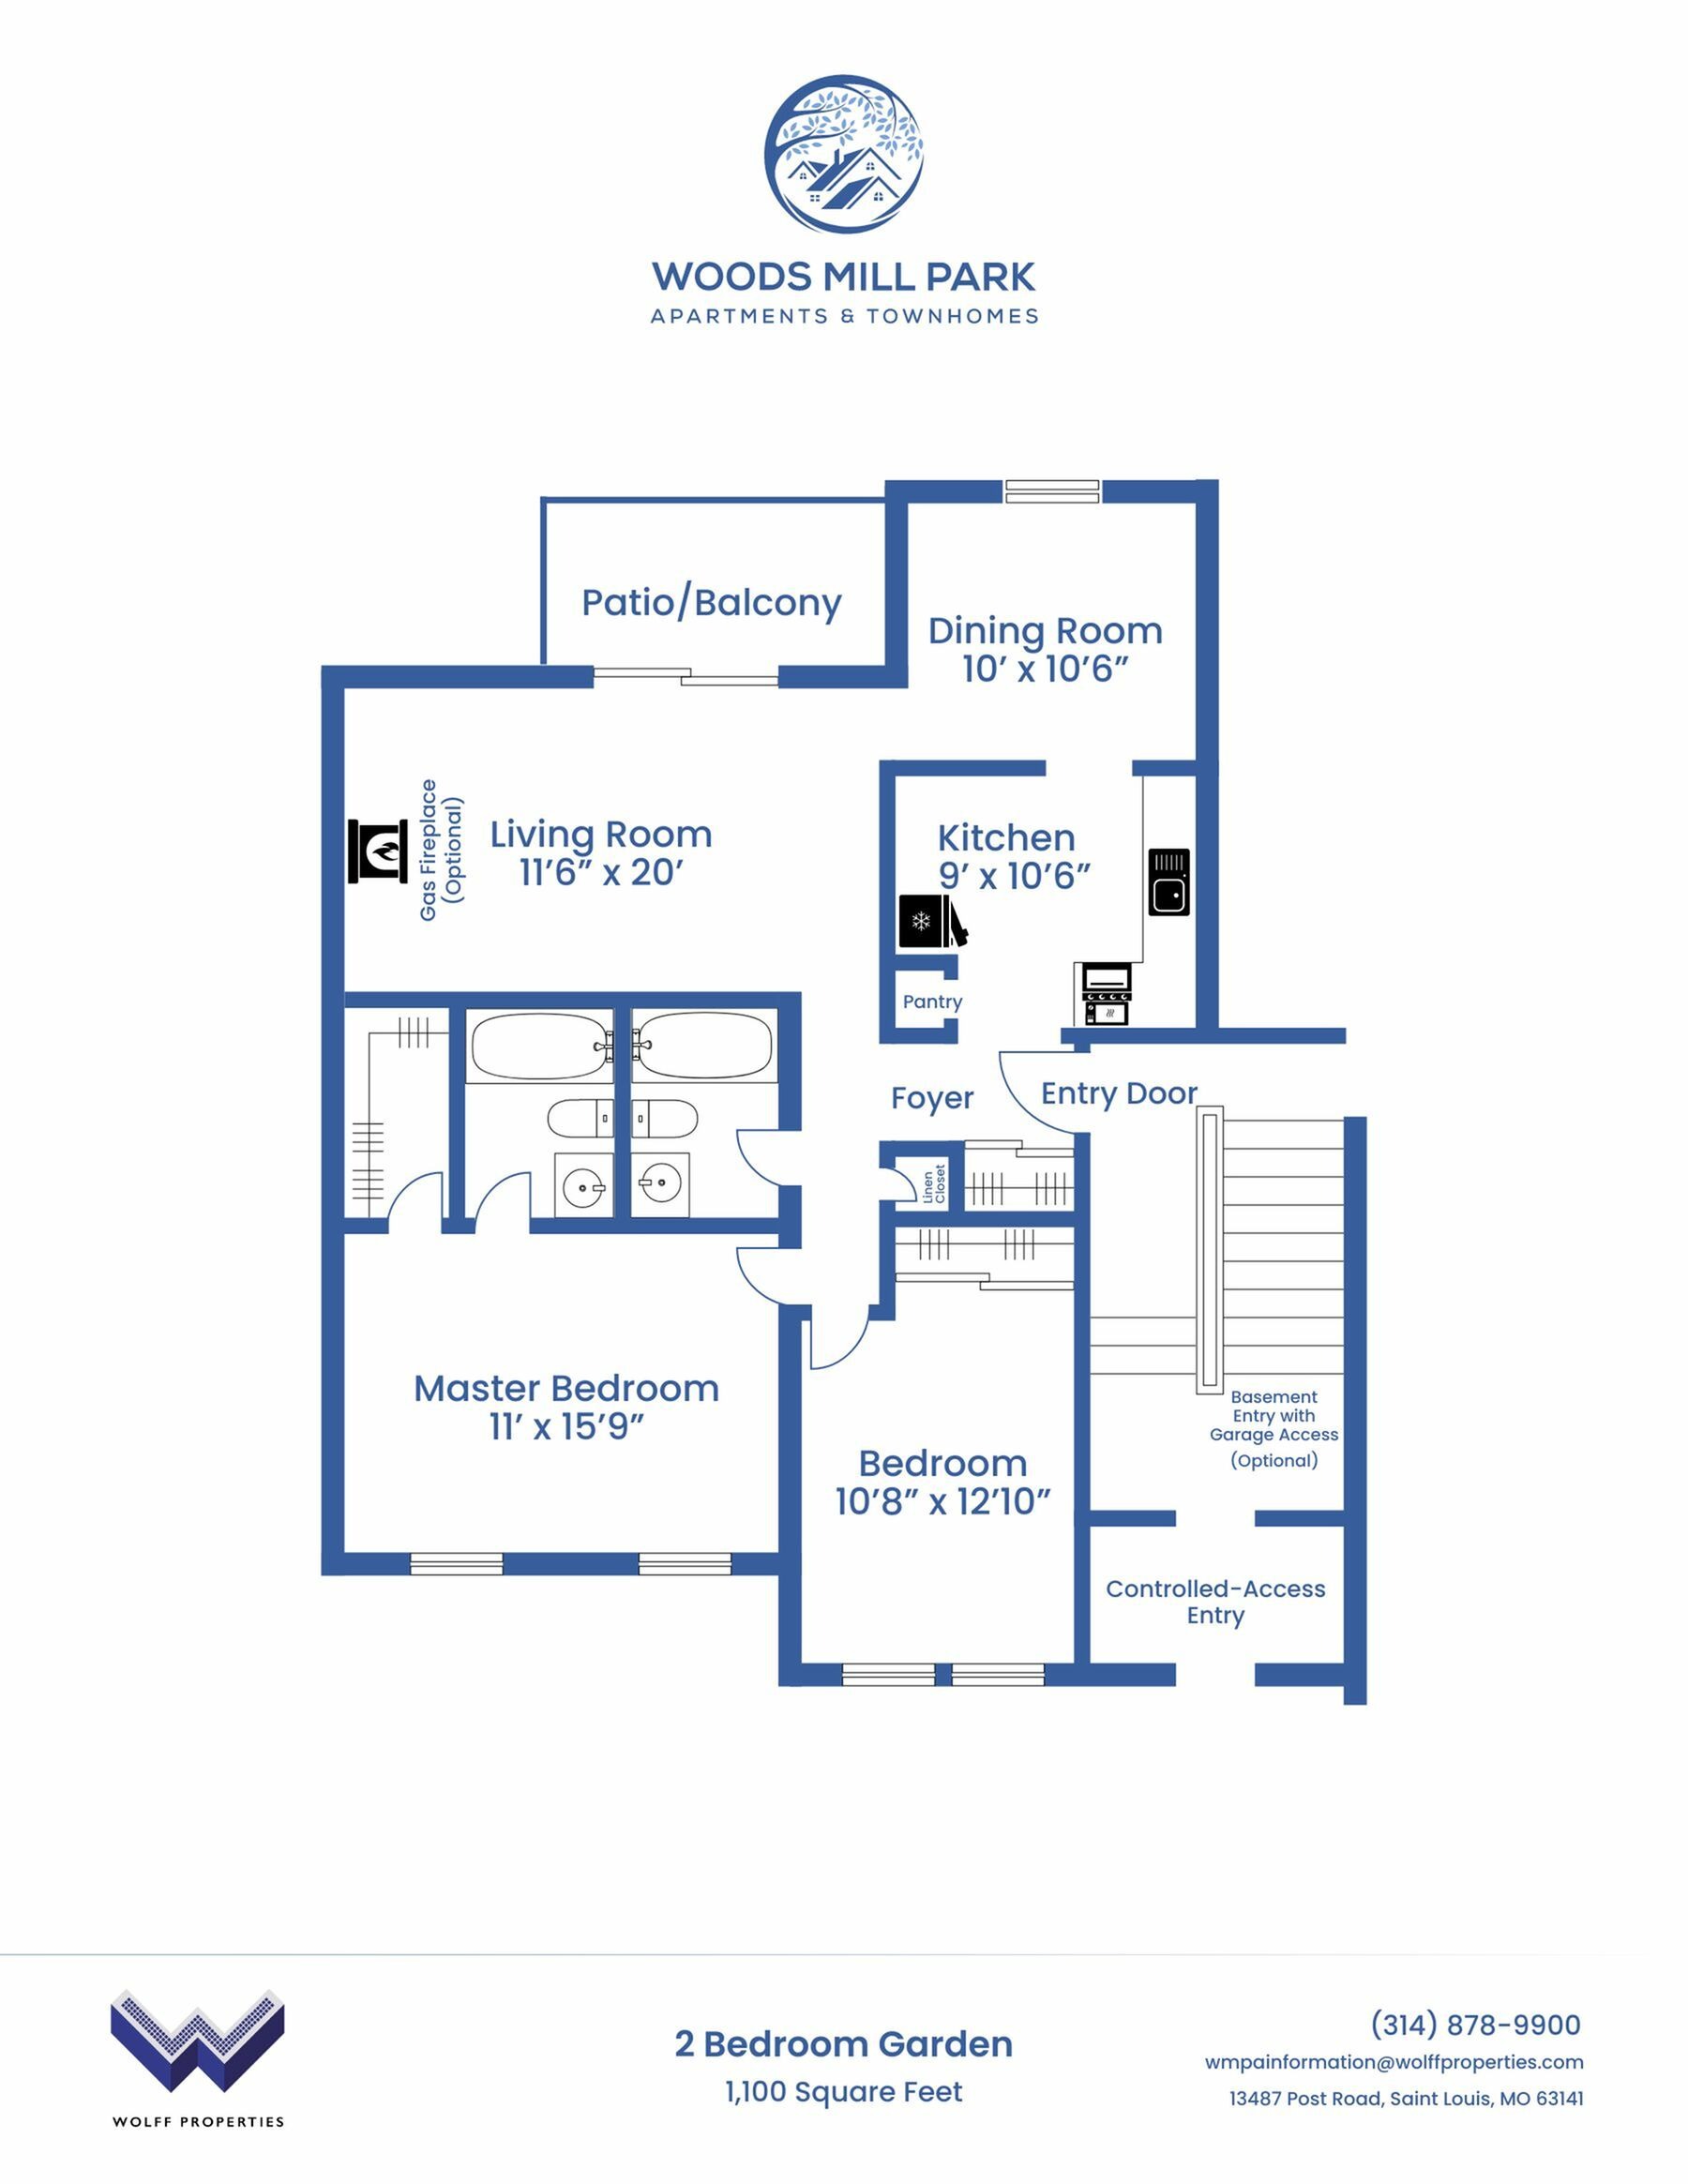 Two Bedroom, Two Bathroom Garden  | Woods Mill Park Apartments & Townhomes in Chesterfield, MO